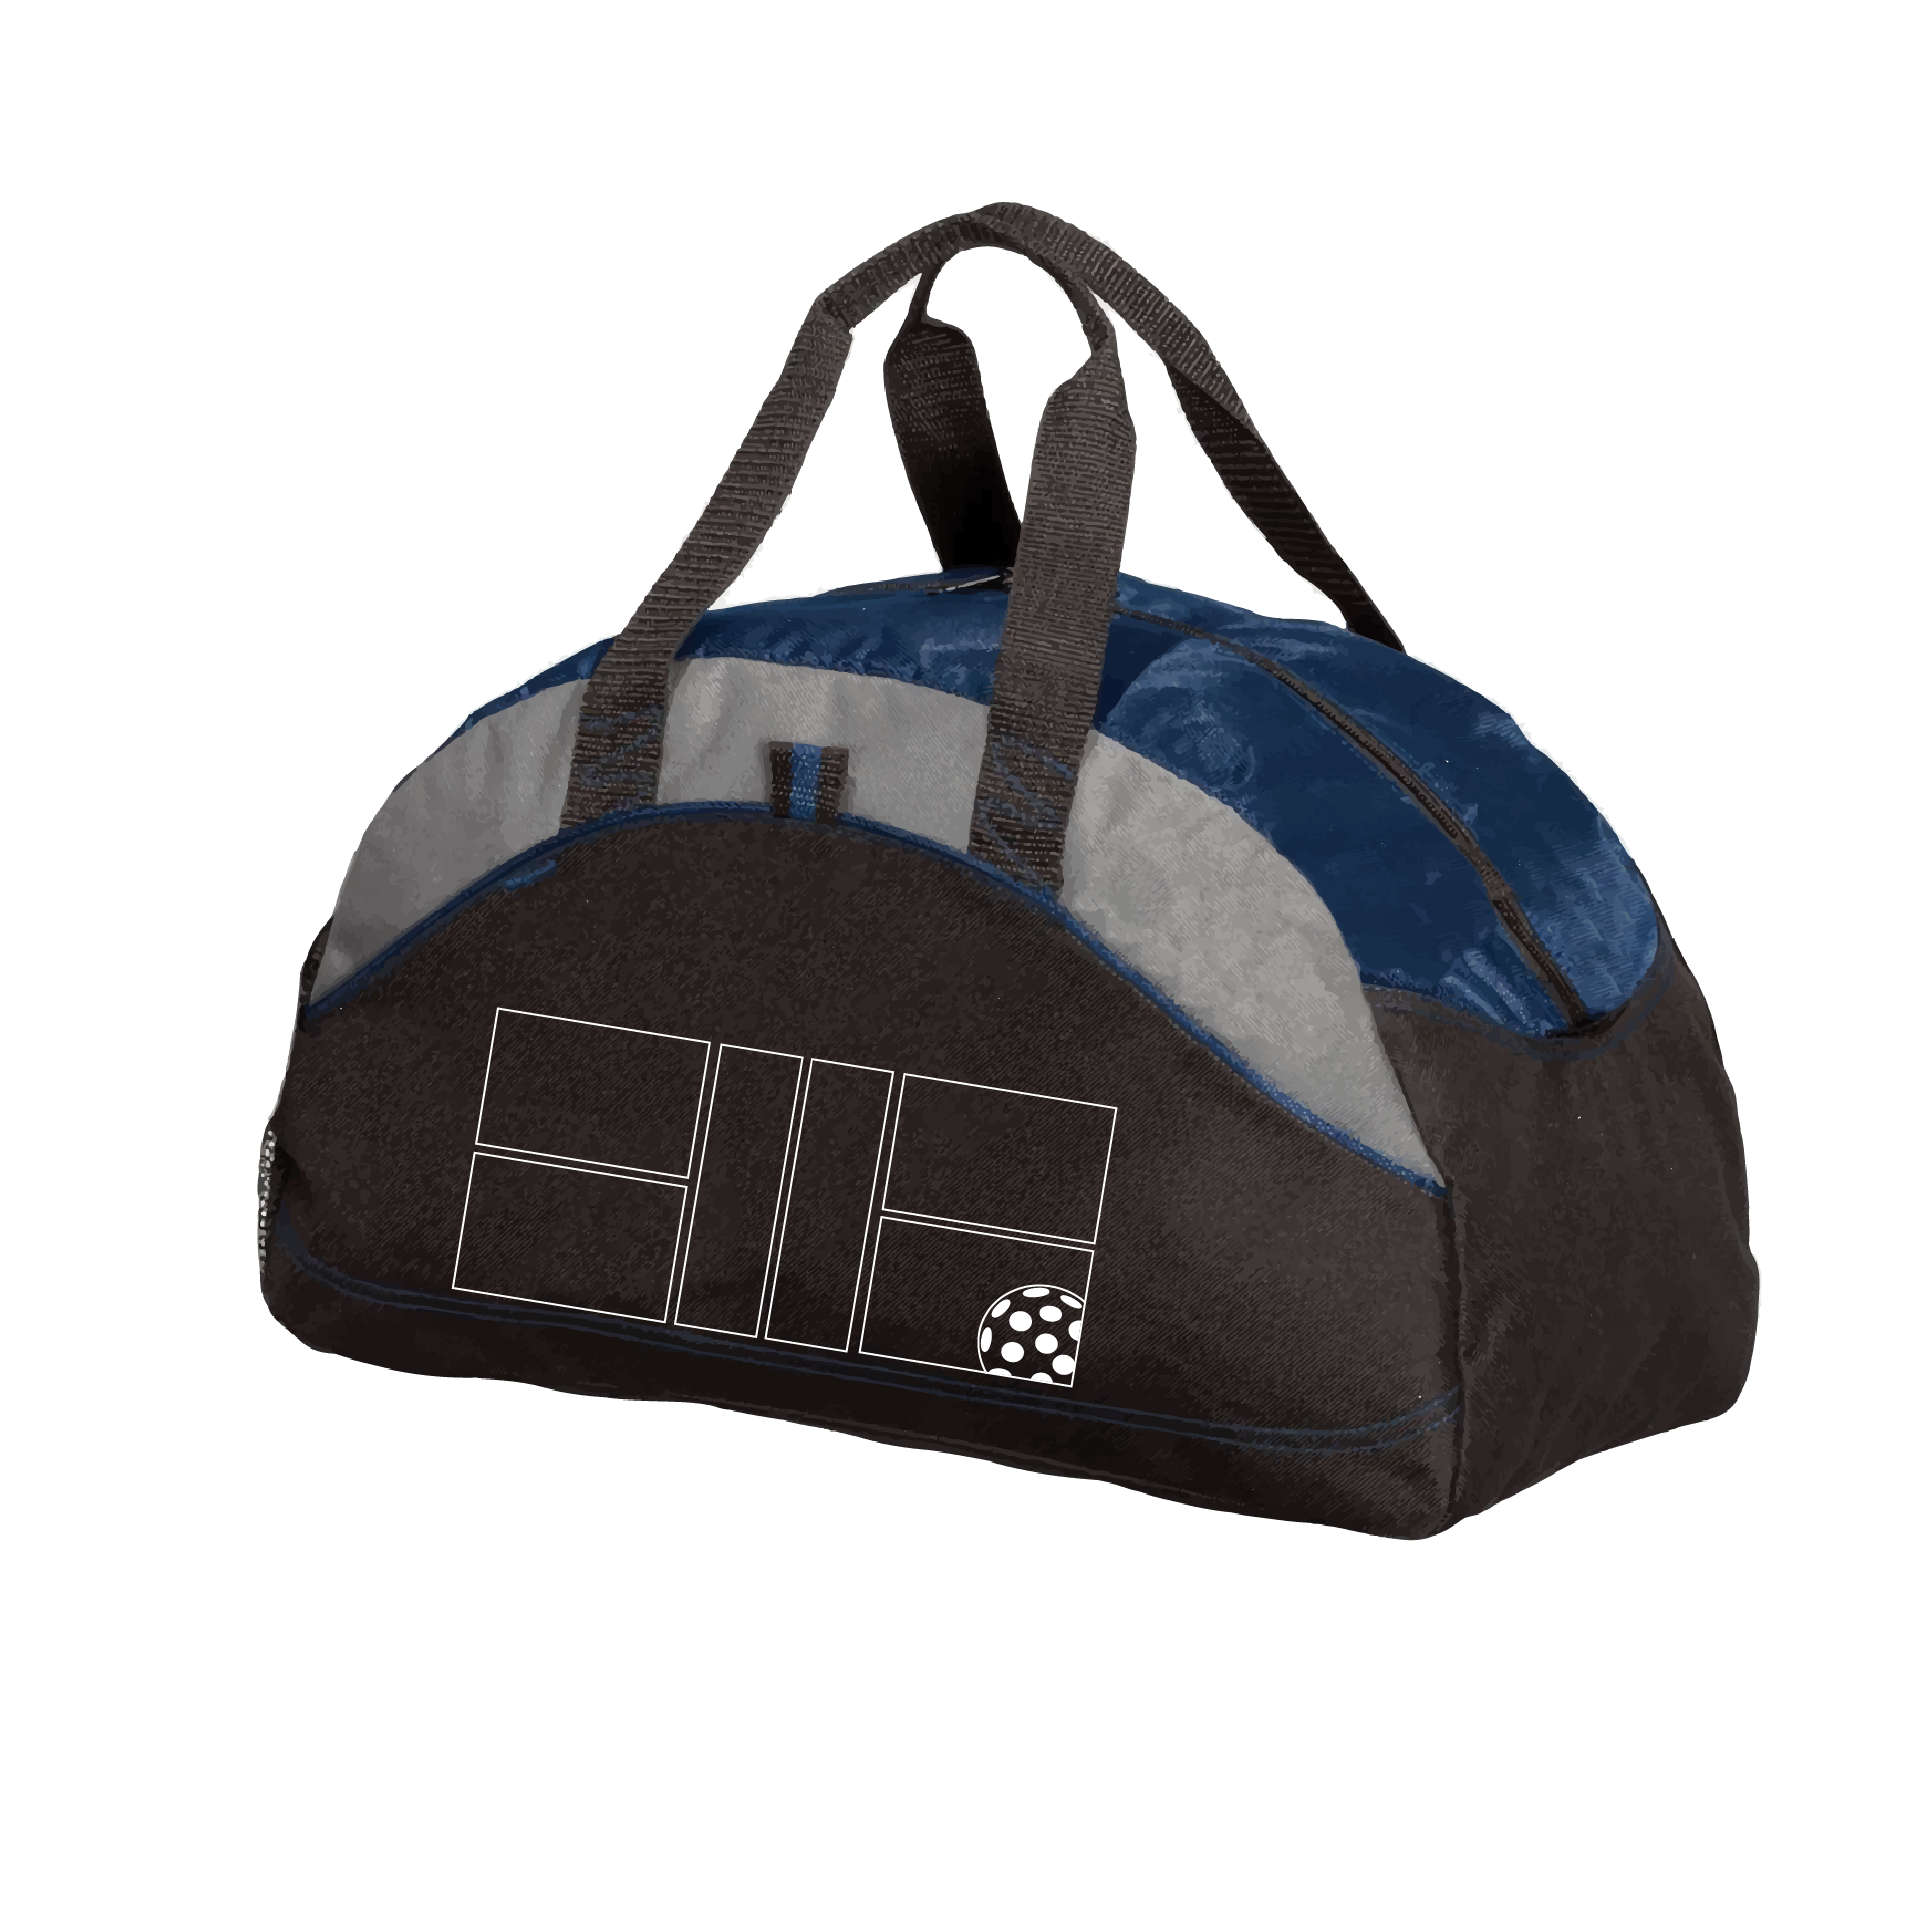 Pickleball Duffel Bag Design: Pickleball Court with Pickleball  Carry your gear in comfort and style. This fun pickleball duffel bag is the perfect accessory for all pickleball players needing to keep their gear in one place. This medium sized duffel tote is ideal for all your pickleball activities. The large center compartment allows for plenty of space and the mesh end pocket is perfect for holding a water bottle. 